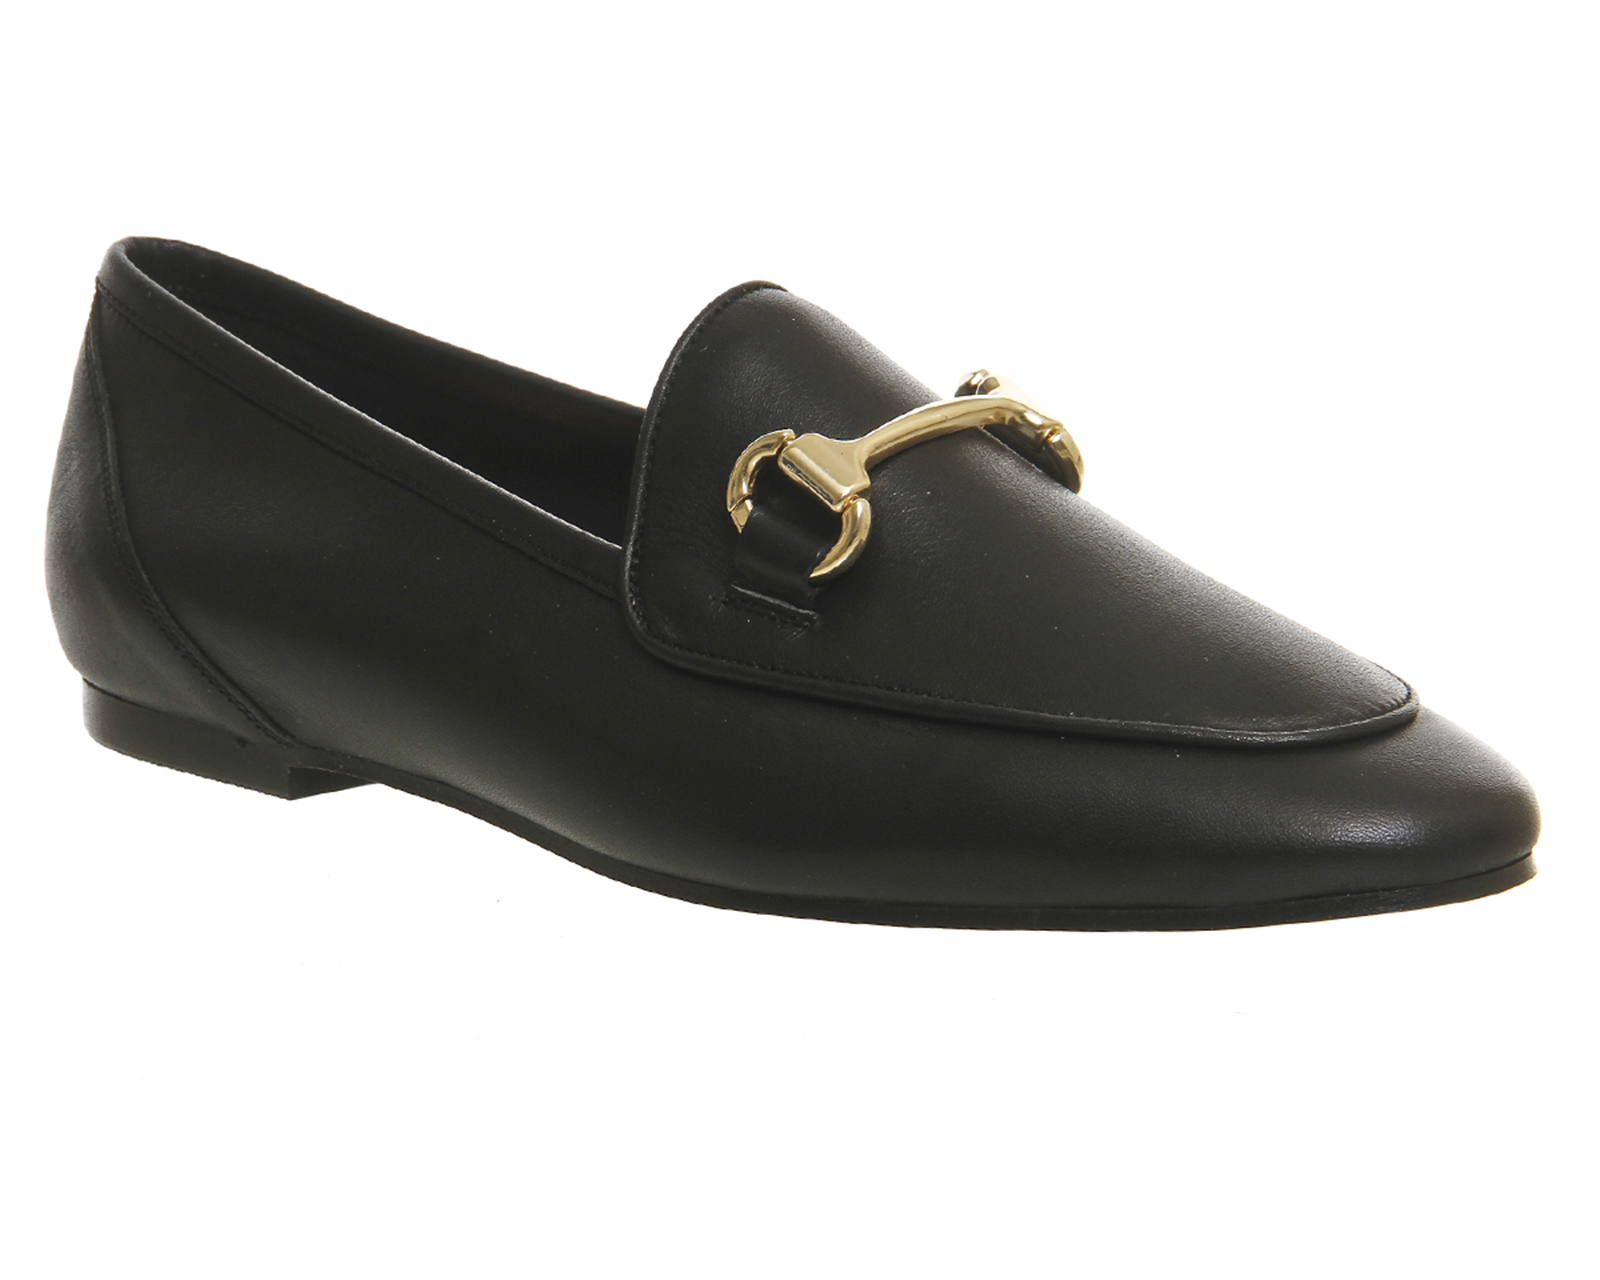 OFFICEDapper Trim LoaferBlack Leather